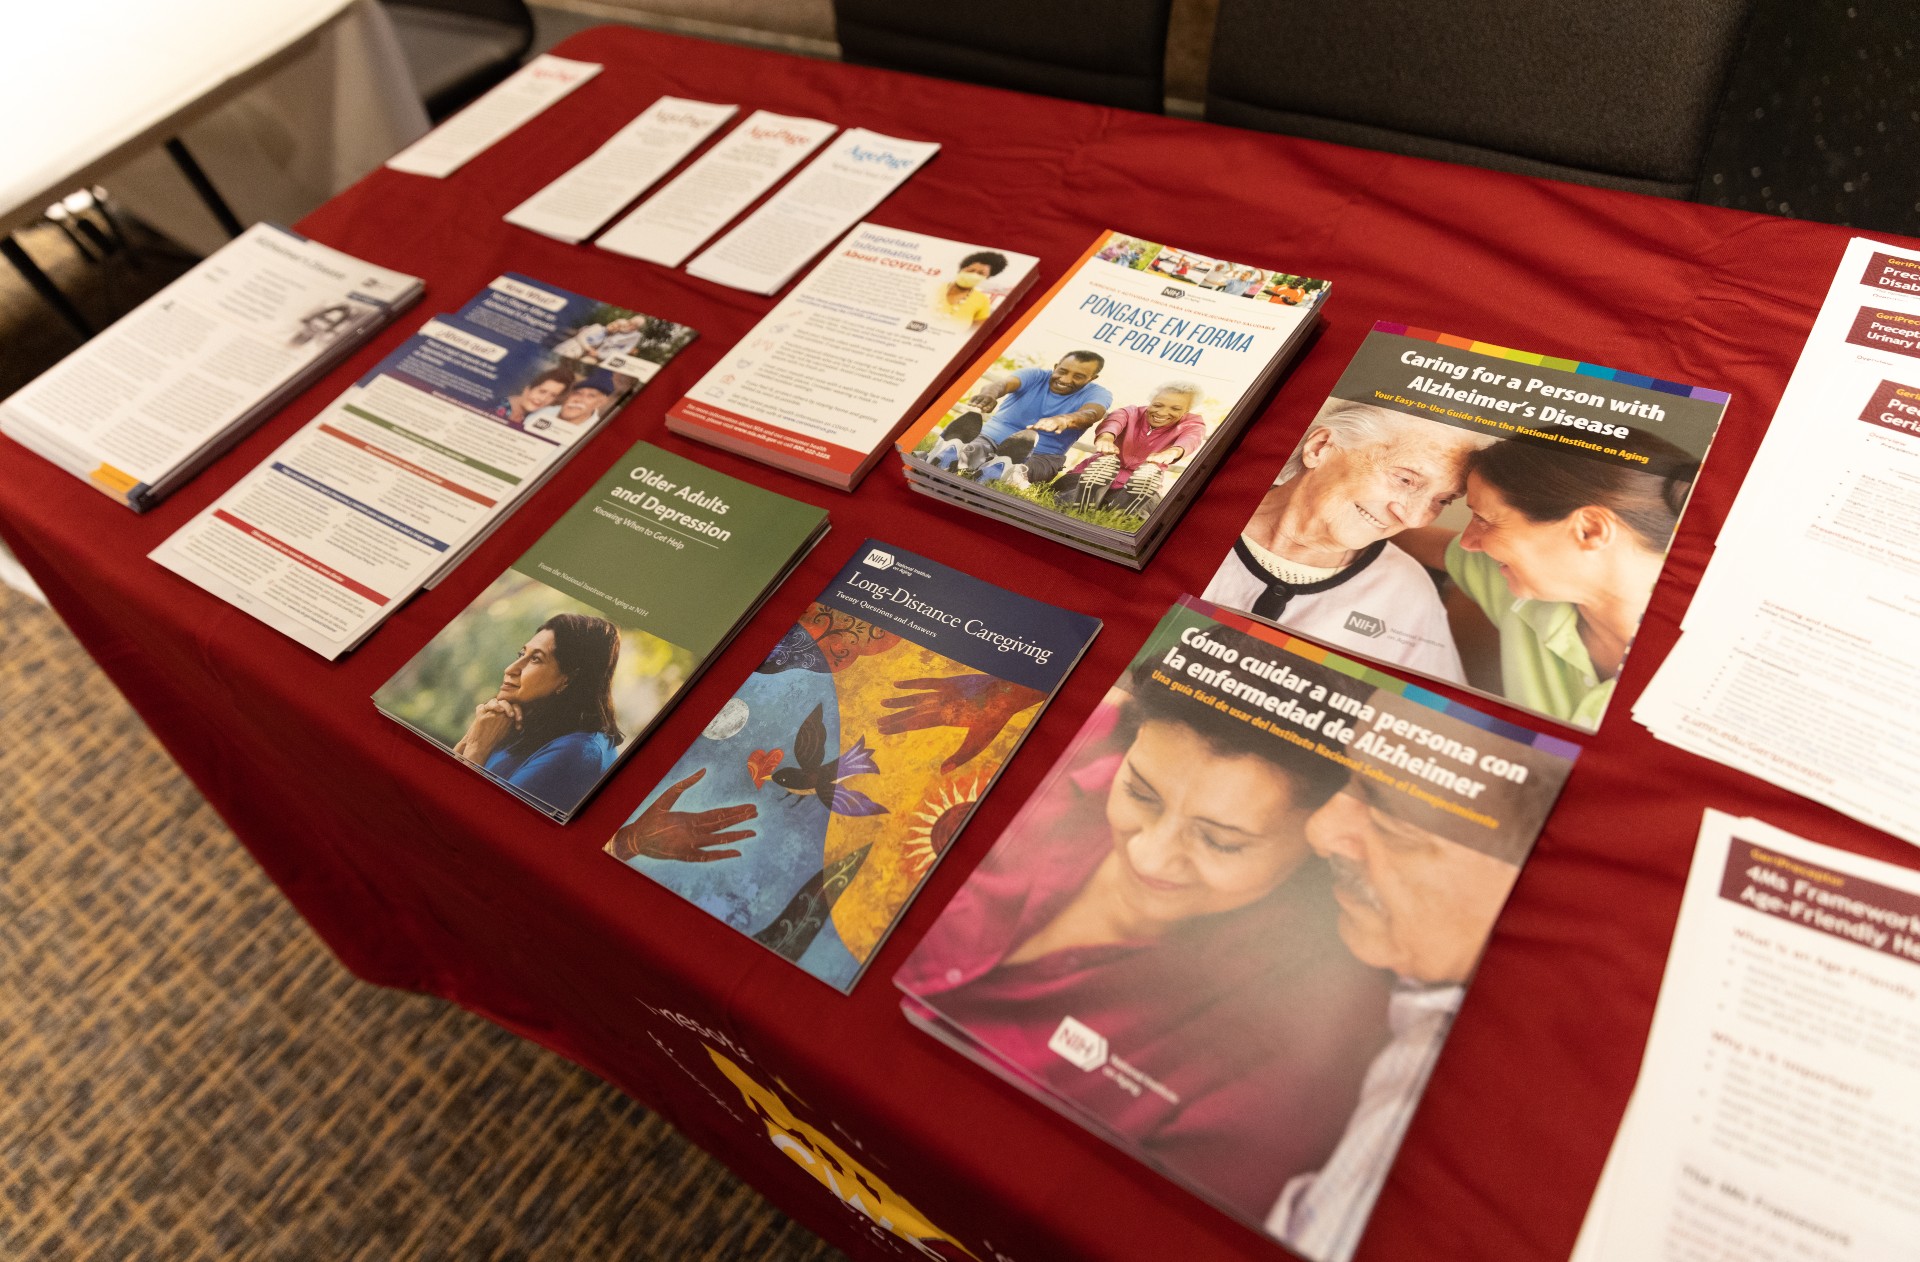 Pamphlets on table featuring different caregiving topics